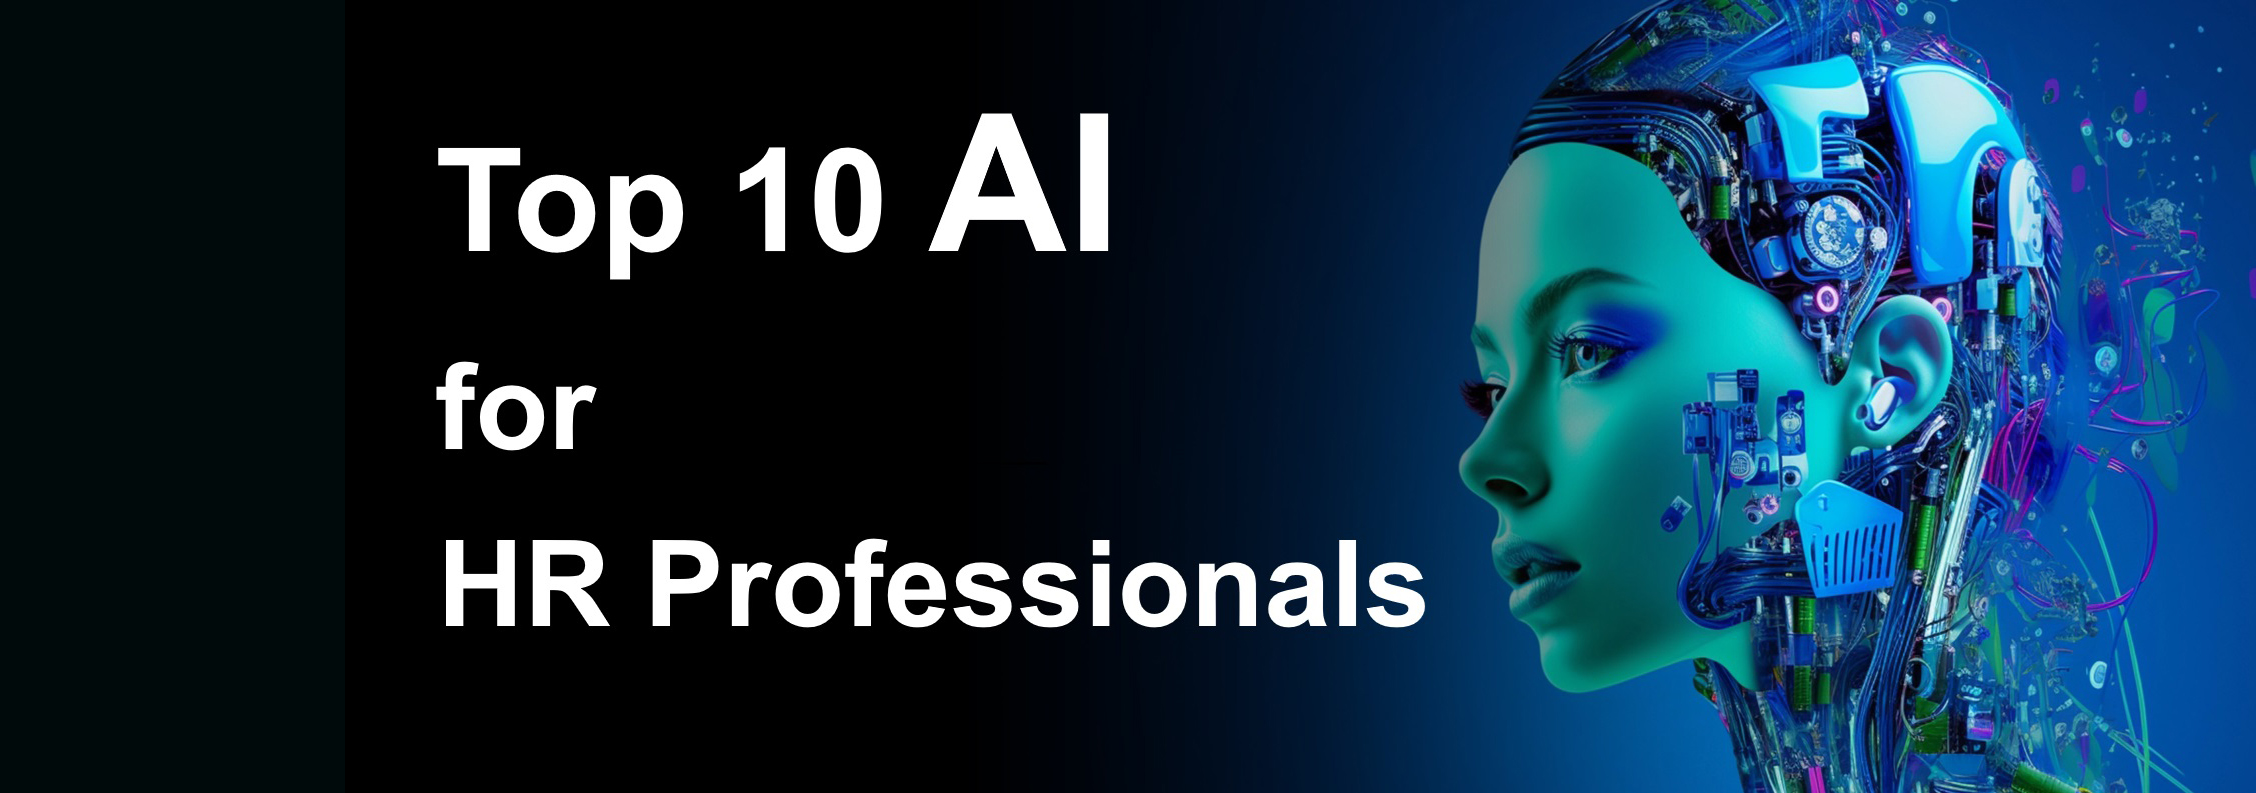 Top 10 AI Tools for HR: Every HR Professional Should Know